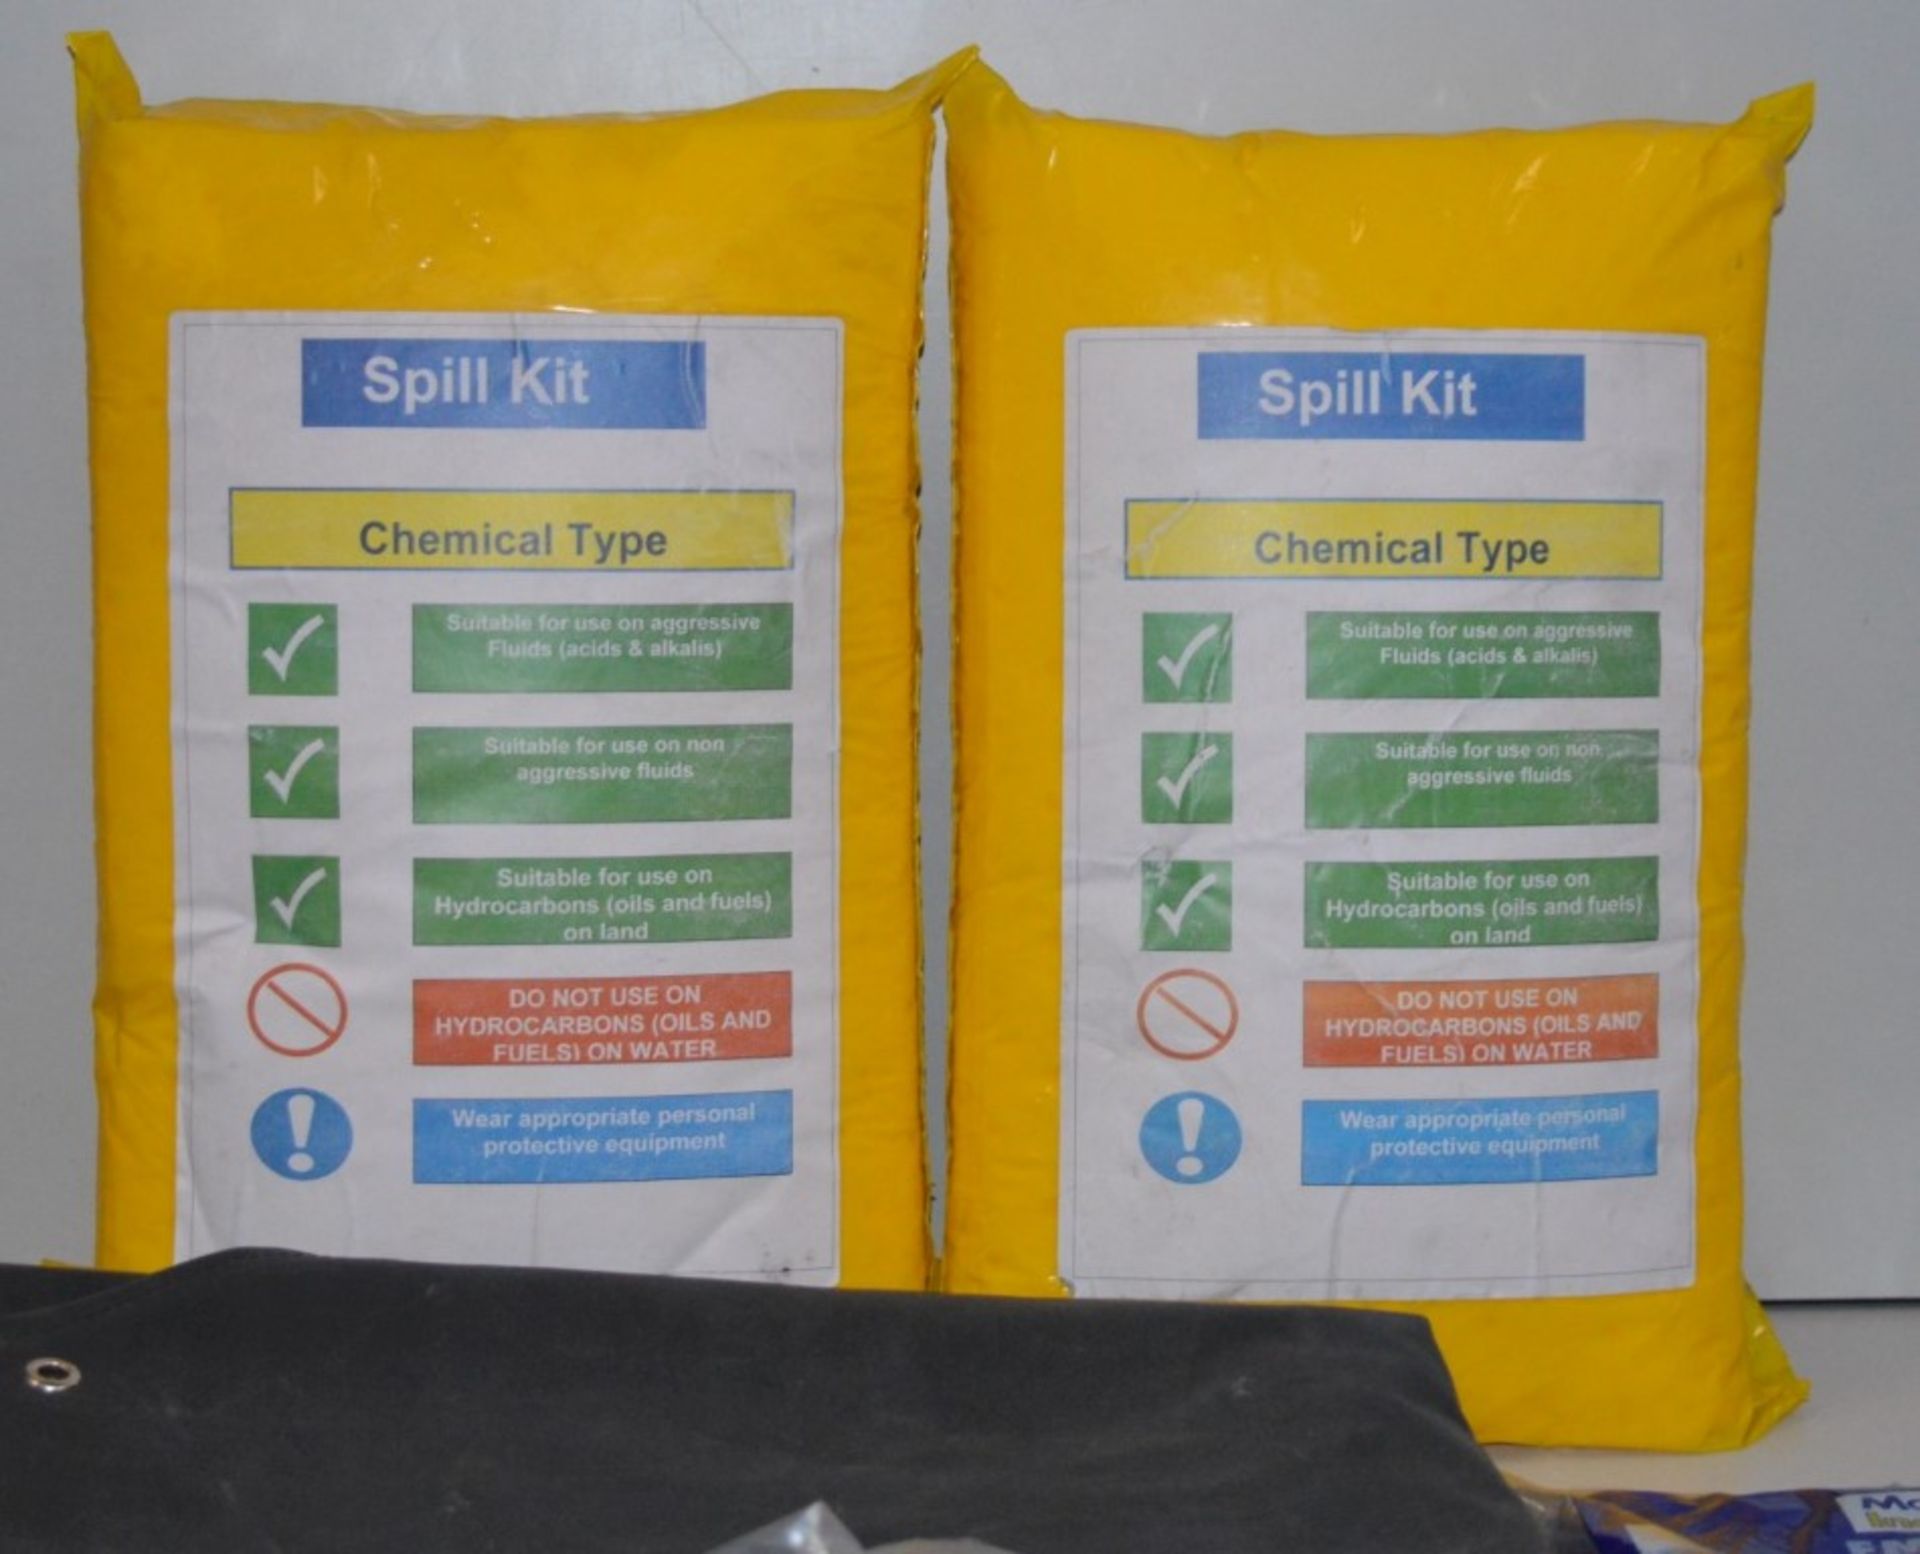 1 x Assorted Collection of Spill Kit Consumables - Includes 2 x Chemical Spill Kits, 1 x Emeror - Image 14 of 16